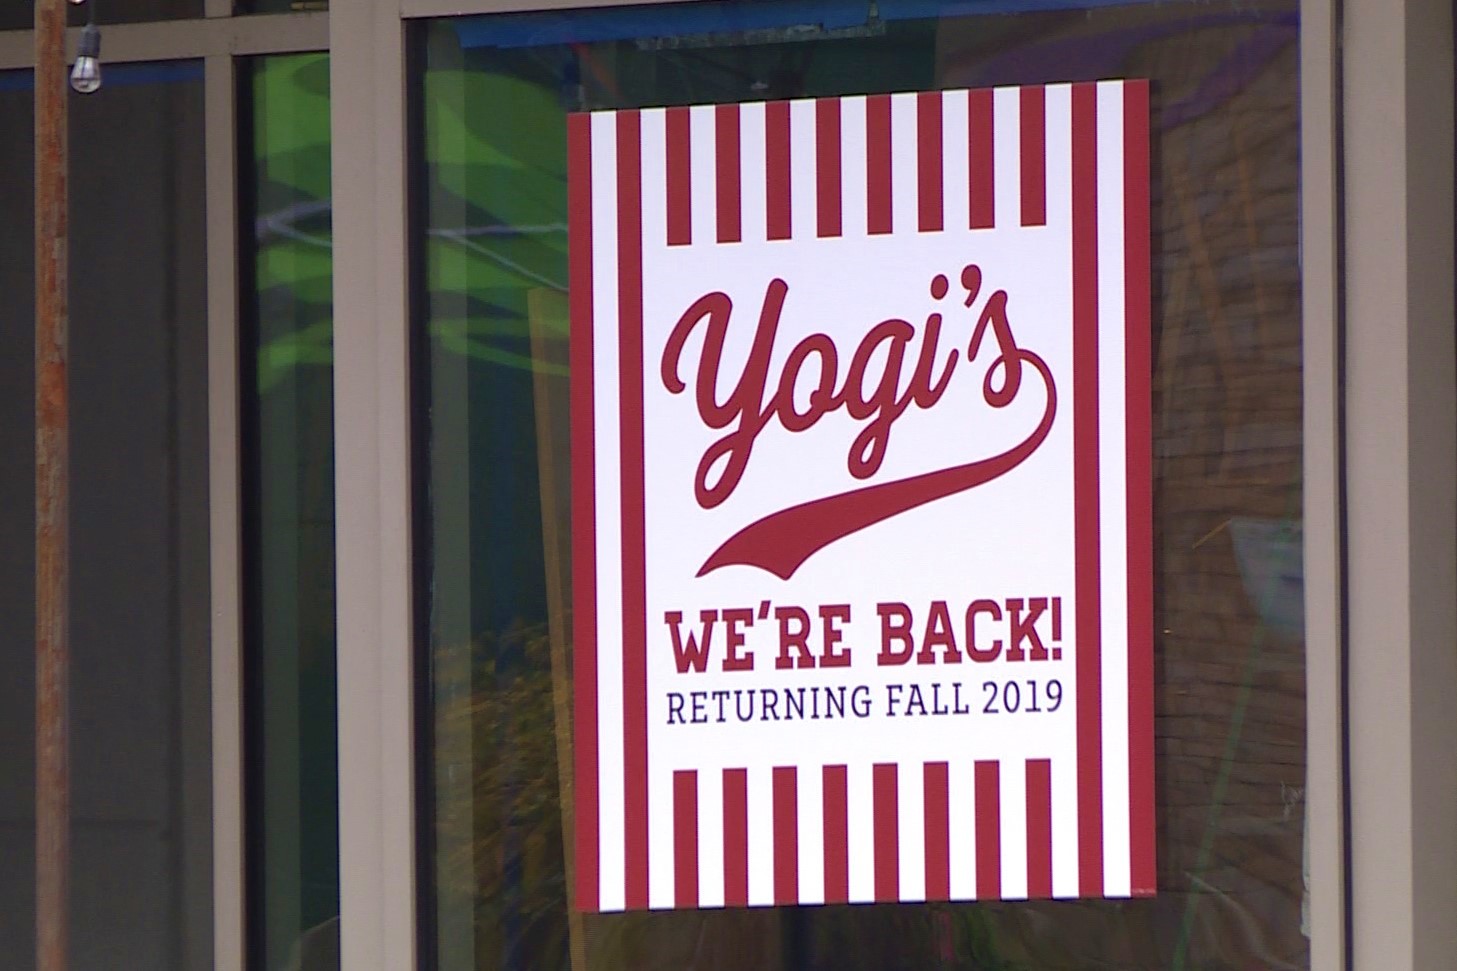 A "we're back!" sign for Yogi's restaurant in downtown Bloomington. October 2019